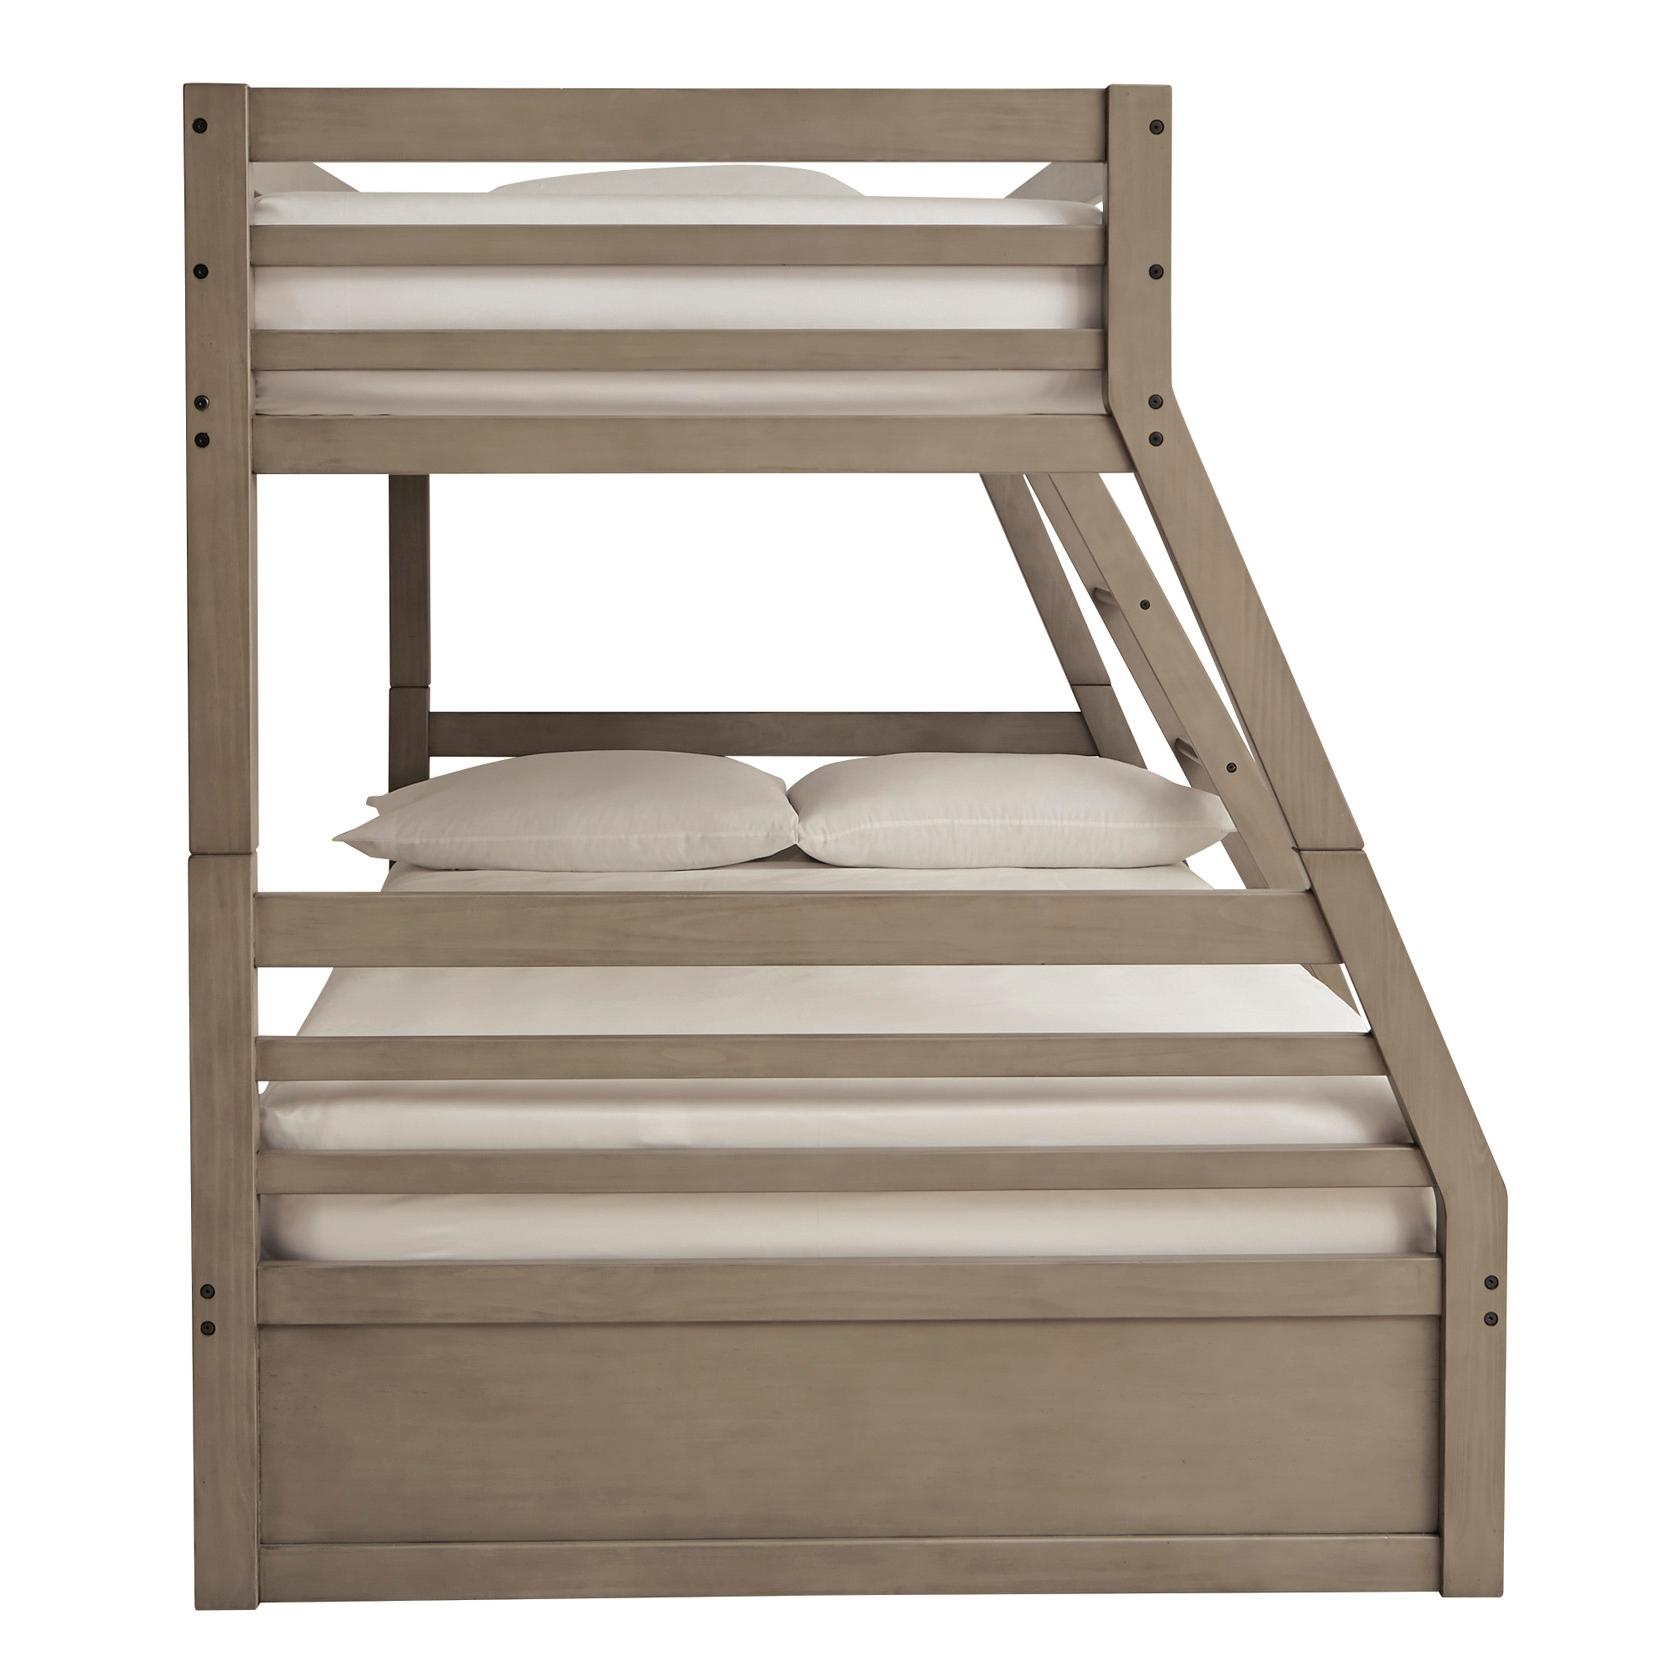 Signature Design by Ashley Kids Beds Bunk Bed B733-58P/B733-58R/B733-50 IMAGE 3